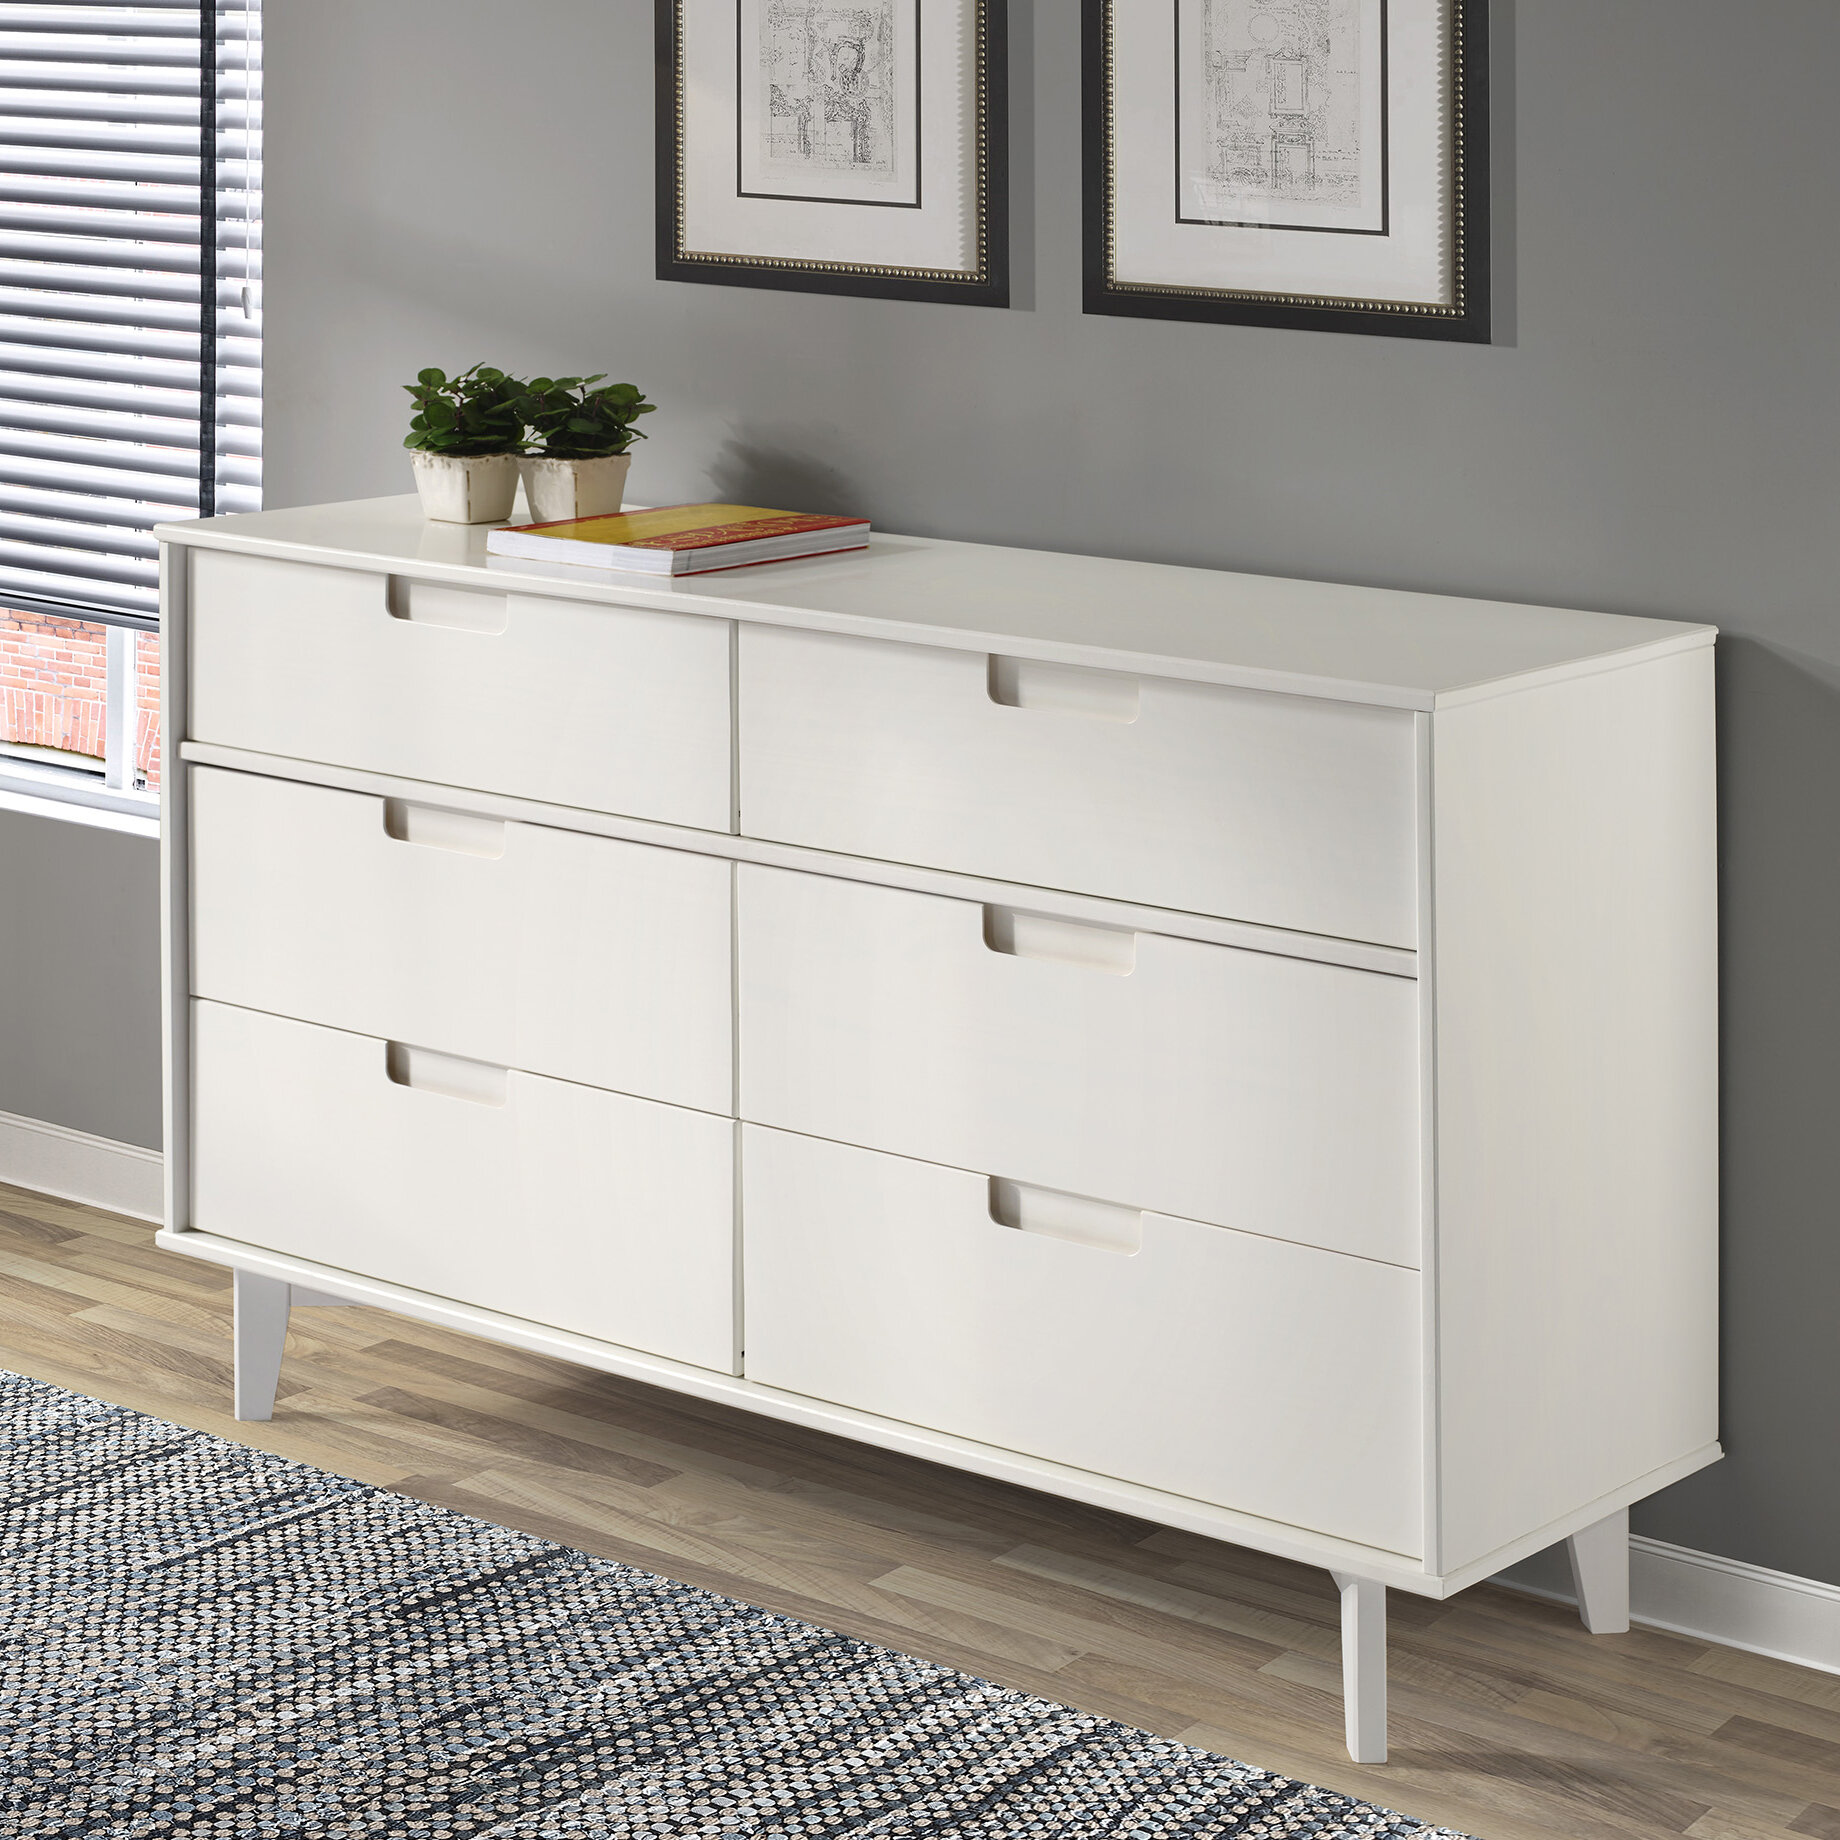 Hashtag Home Cecille Groove 6 Drawer Double Dresser Reviews